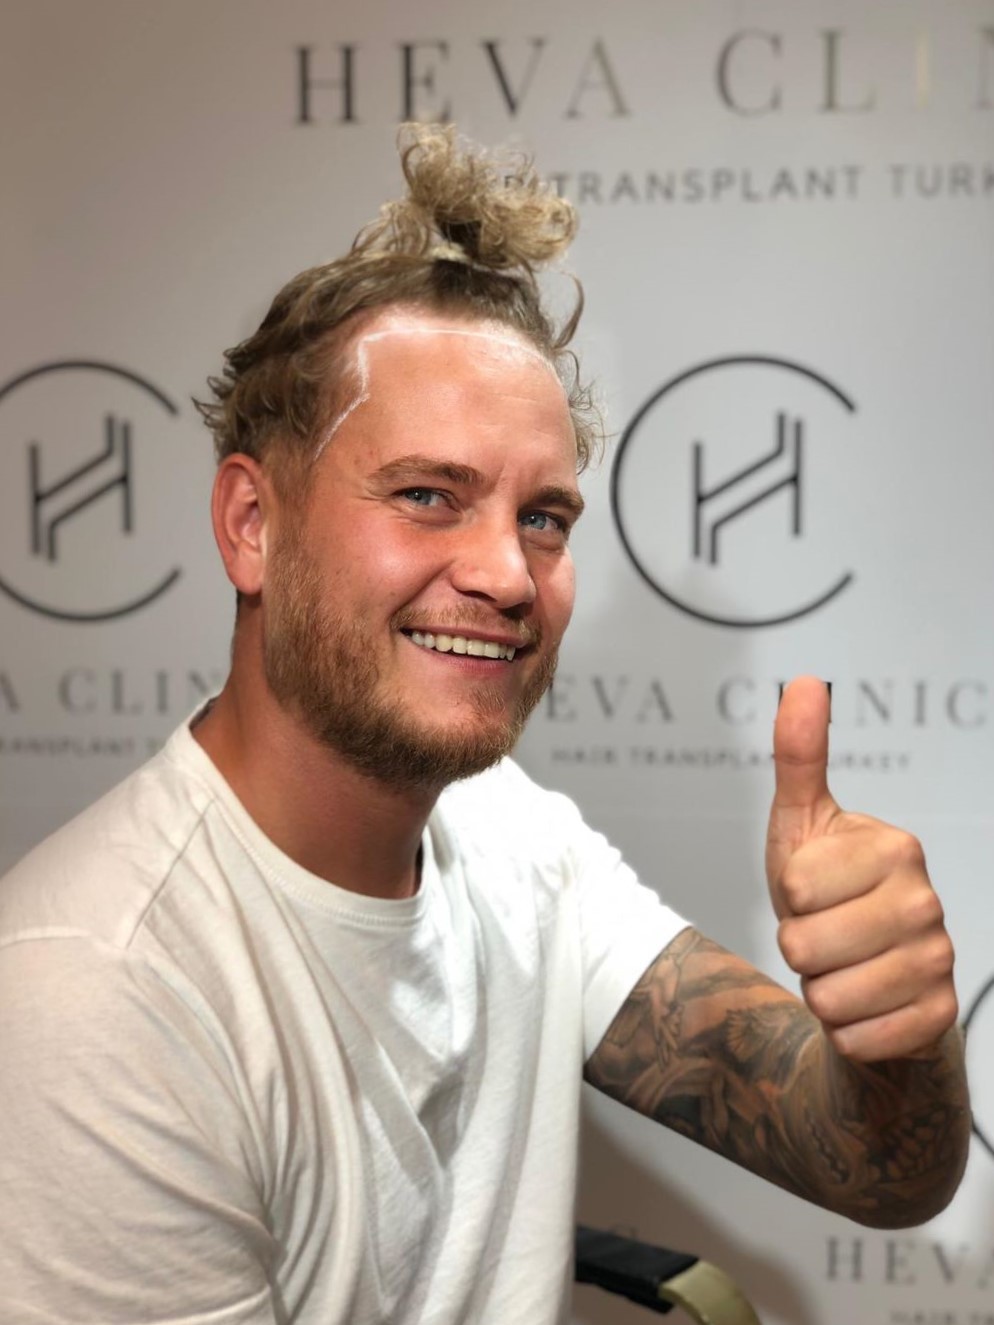 hair transplant patient from the UK to Turkey